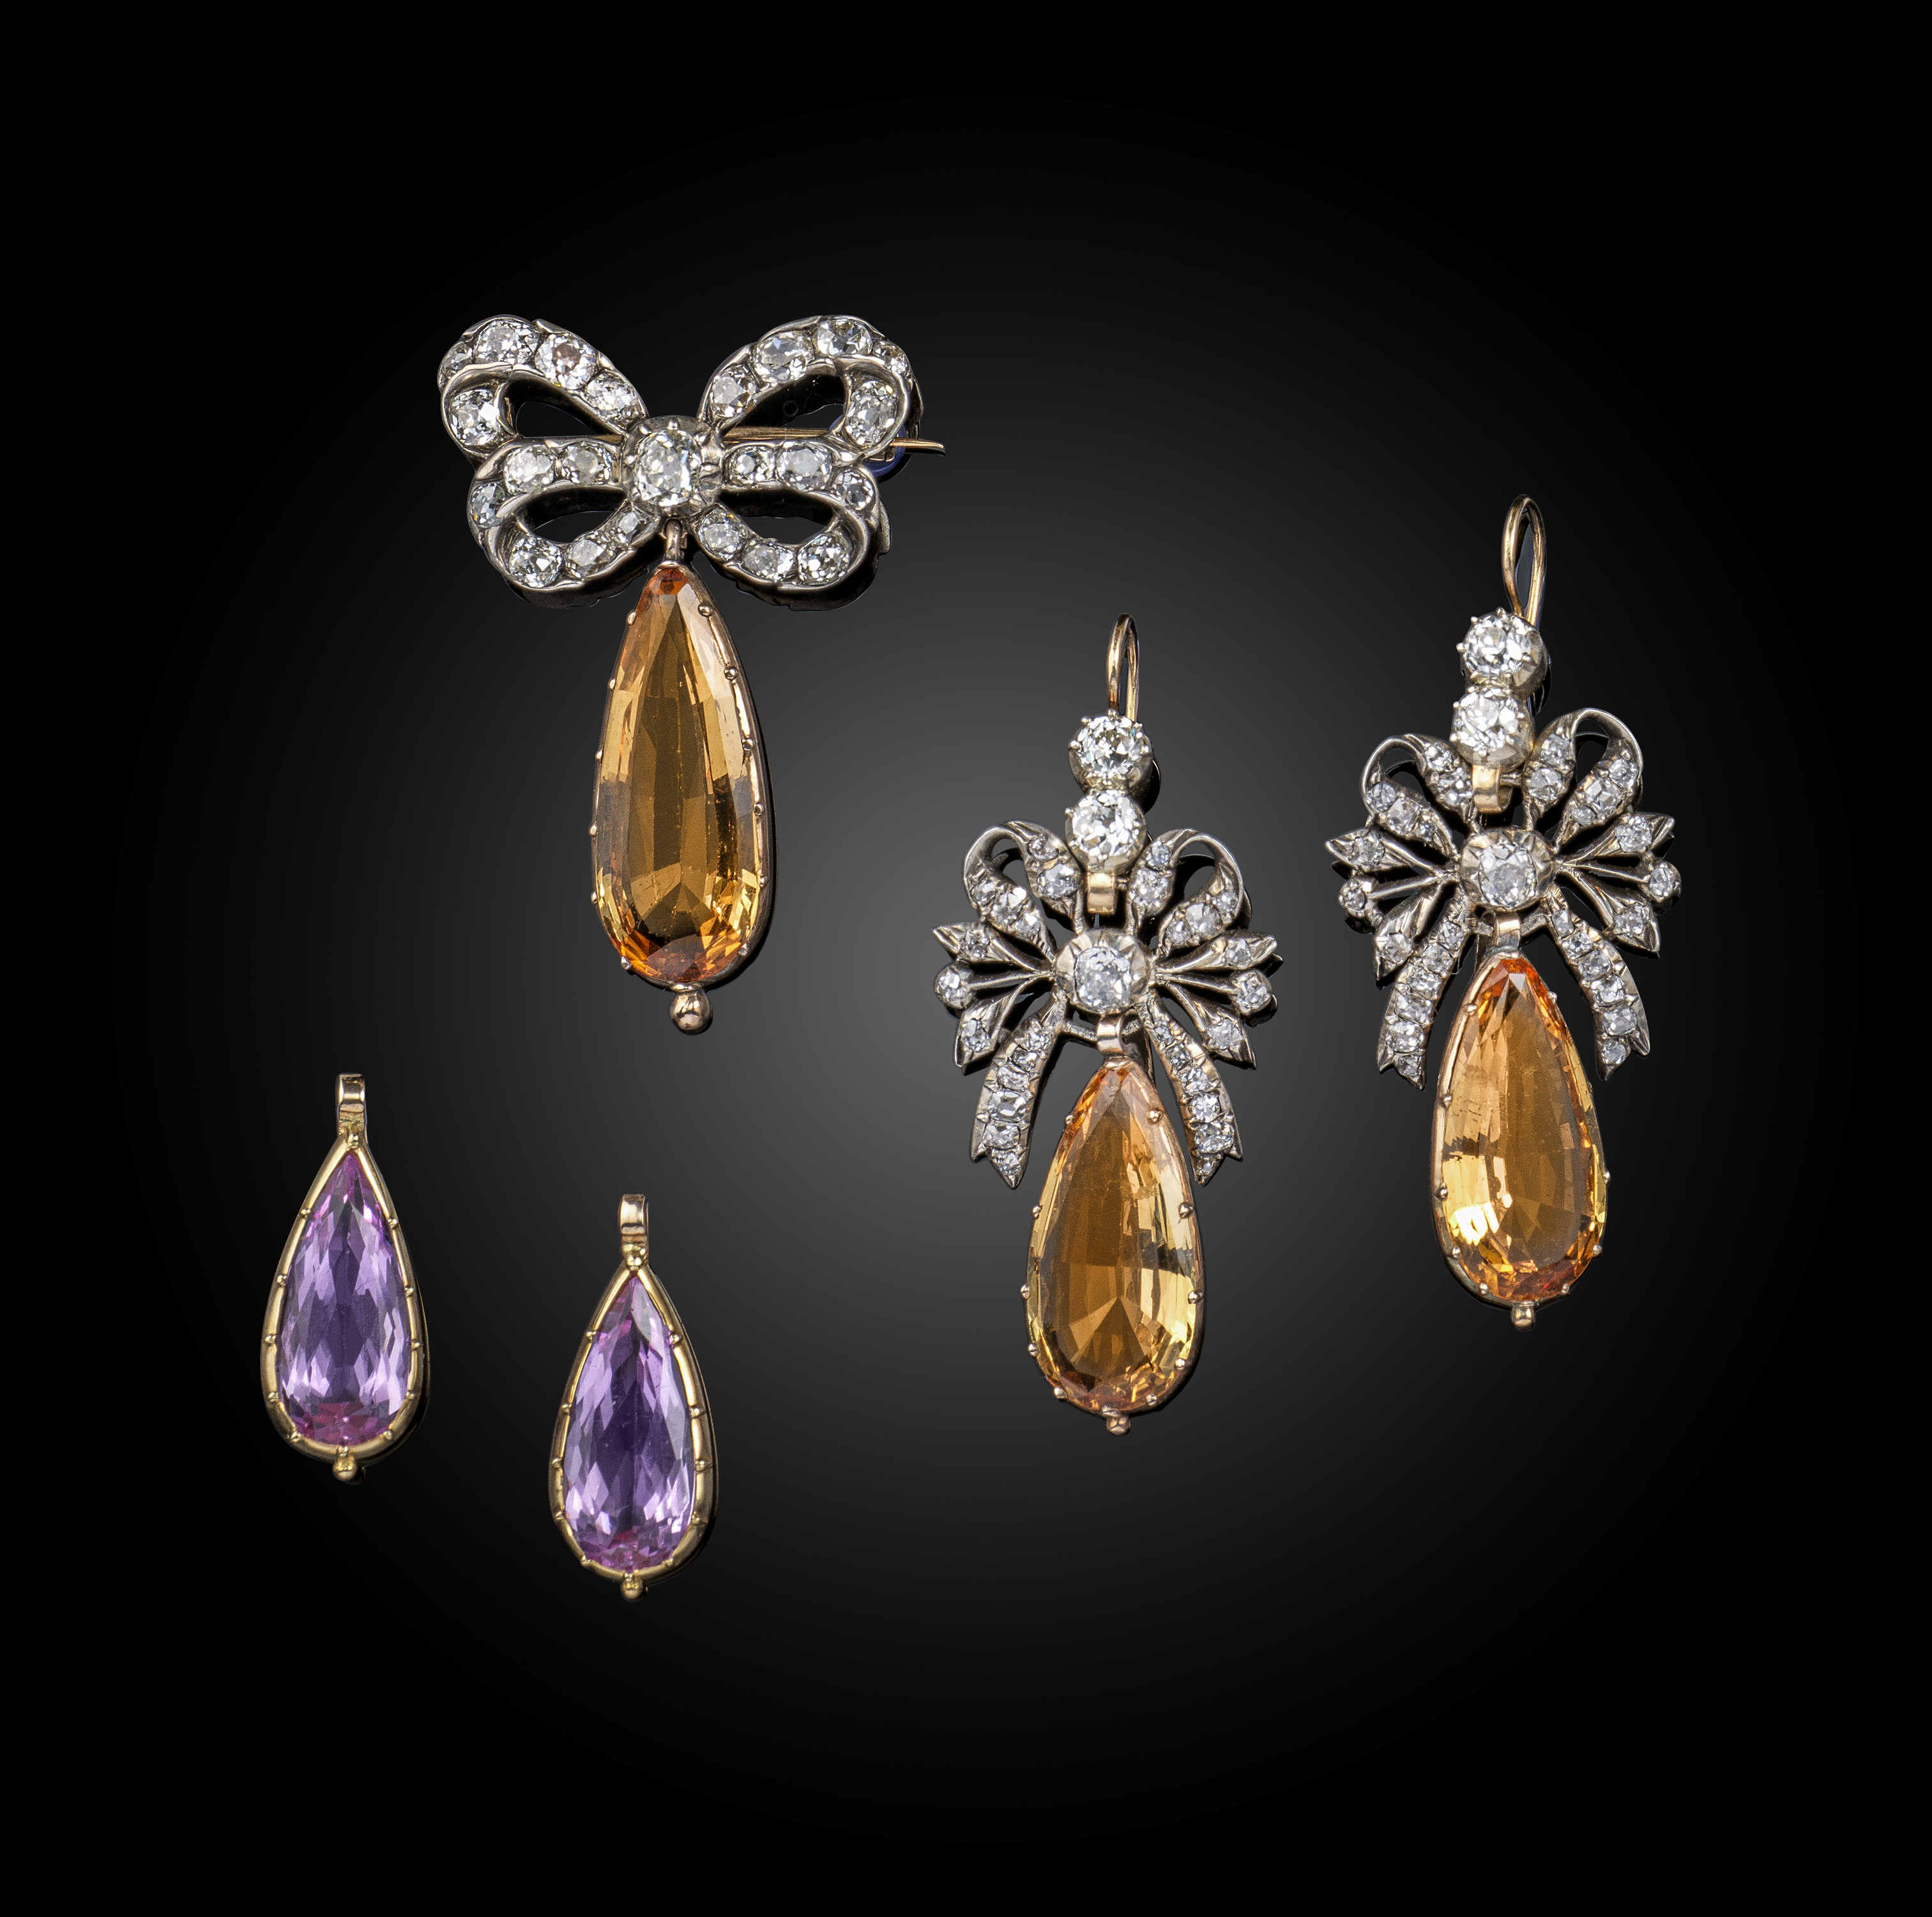 A late 18th century (and later) topaz demi parure, the closed-back silver diamond-set bows suspend